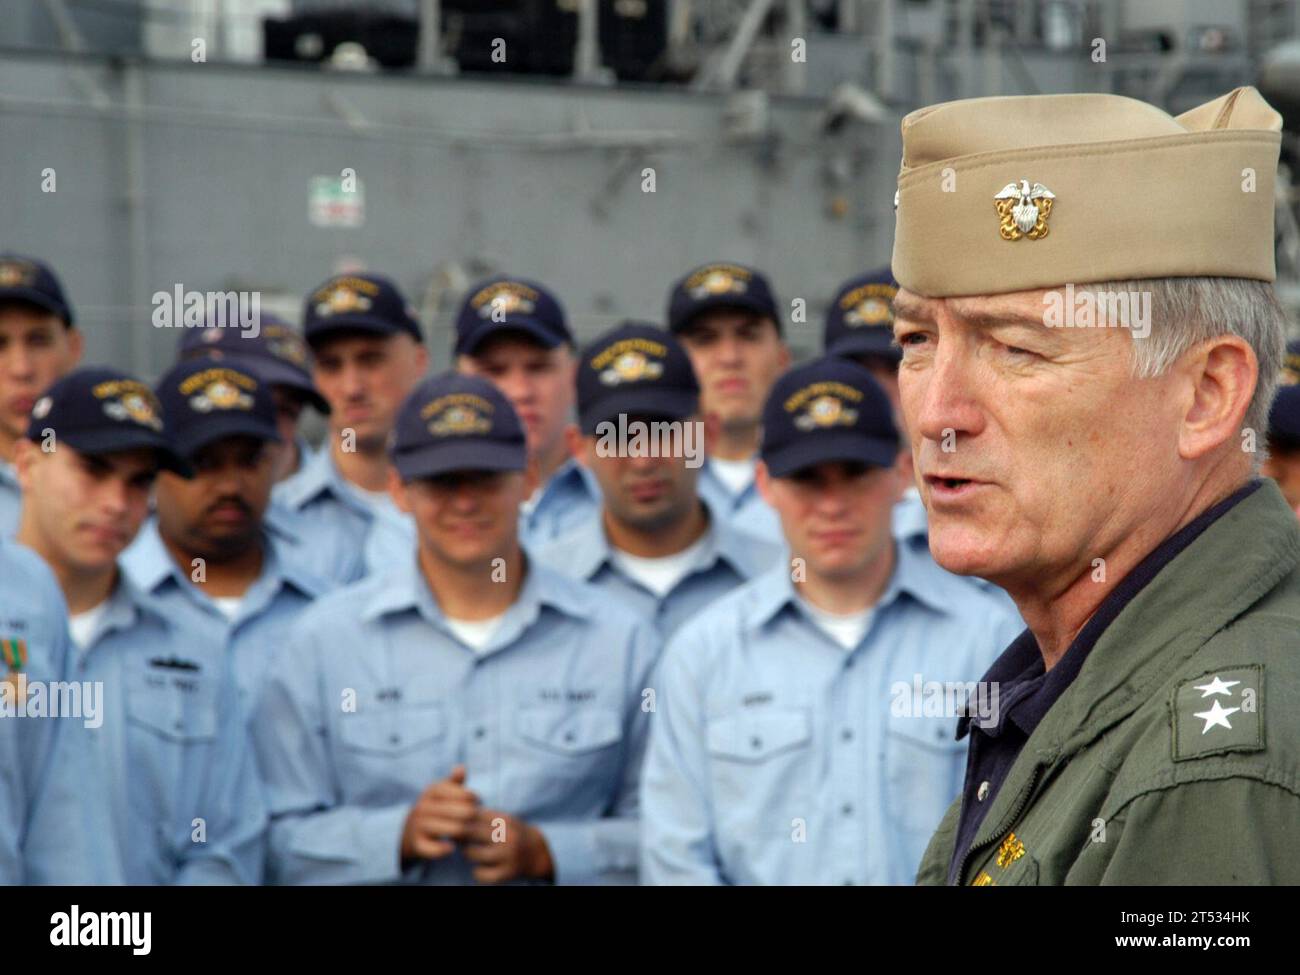 0710150807W-050  YOKOSUKA, Japan (Oct. 15, 2007) - Rear Adm. James D. Kelly, commander of U.S. Naval Forces Japan, speaks to Sailors of USS Patriot (MCM 7) and USS Guardian (MCM 5) during an awards ceremony at Fleet Activities Yokosuka. Three Sailors from the Sasebo-based mine countermeasures ships were honored for the integrity, commitment and professionalism they displayed in the midst of a protest in Yonaguni, Japan. U.S. Navy Stock Photo